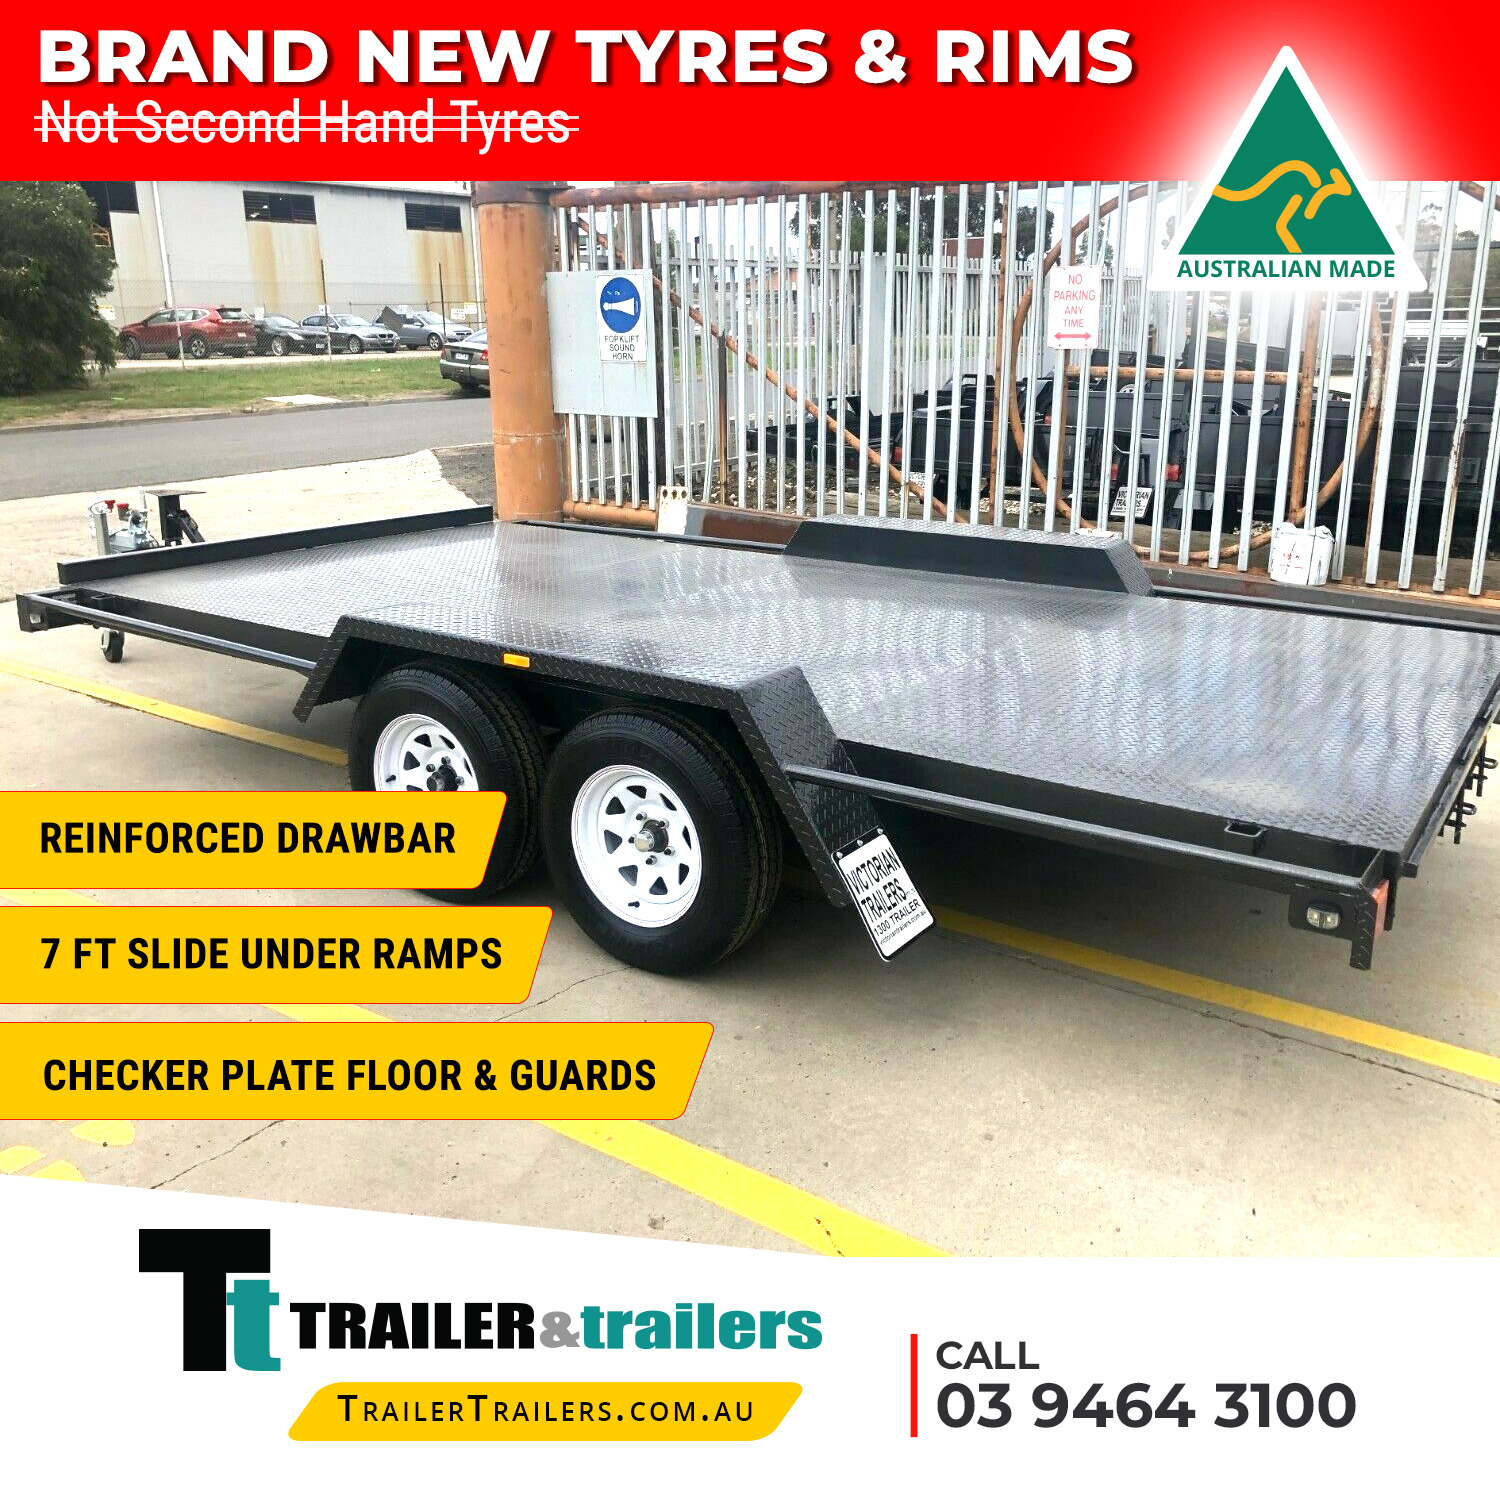 14x6'6 TANDEM AXLE SEMI FLAT CAR CARRIER TRAILER | 7FT RAMPS |NEW WHEELS & TYRES